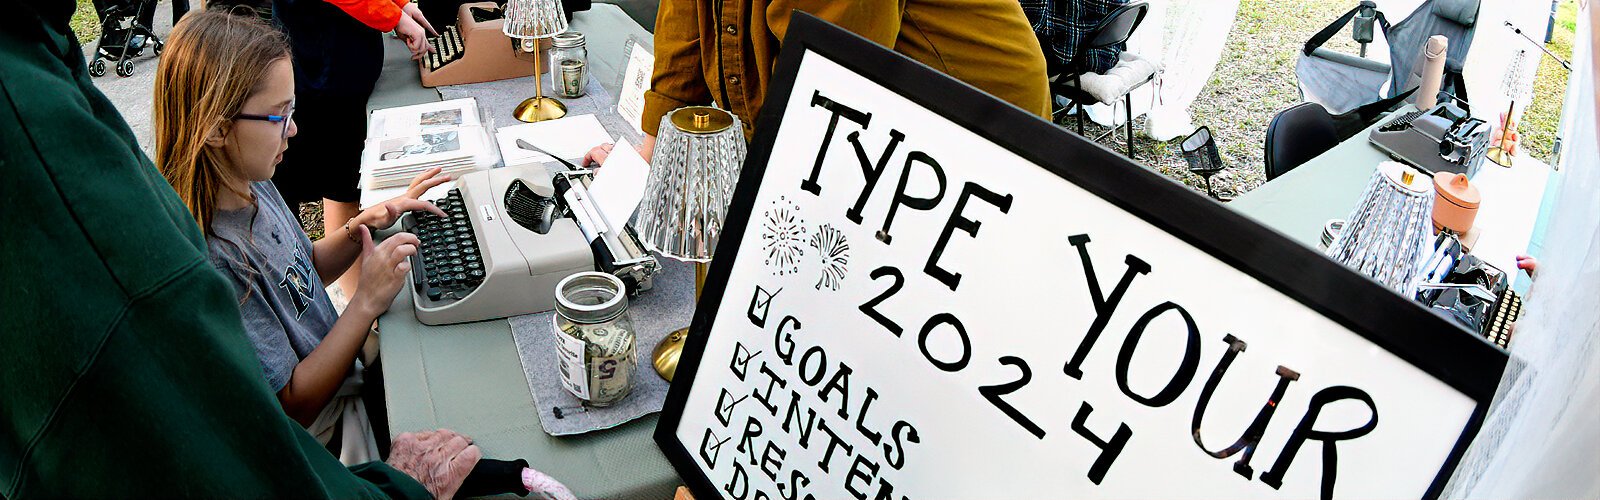 Typewriters provided by Merk The Moment are at the ready for event goers to type out their 2024 goals and resolutions.